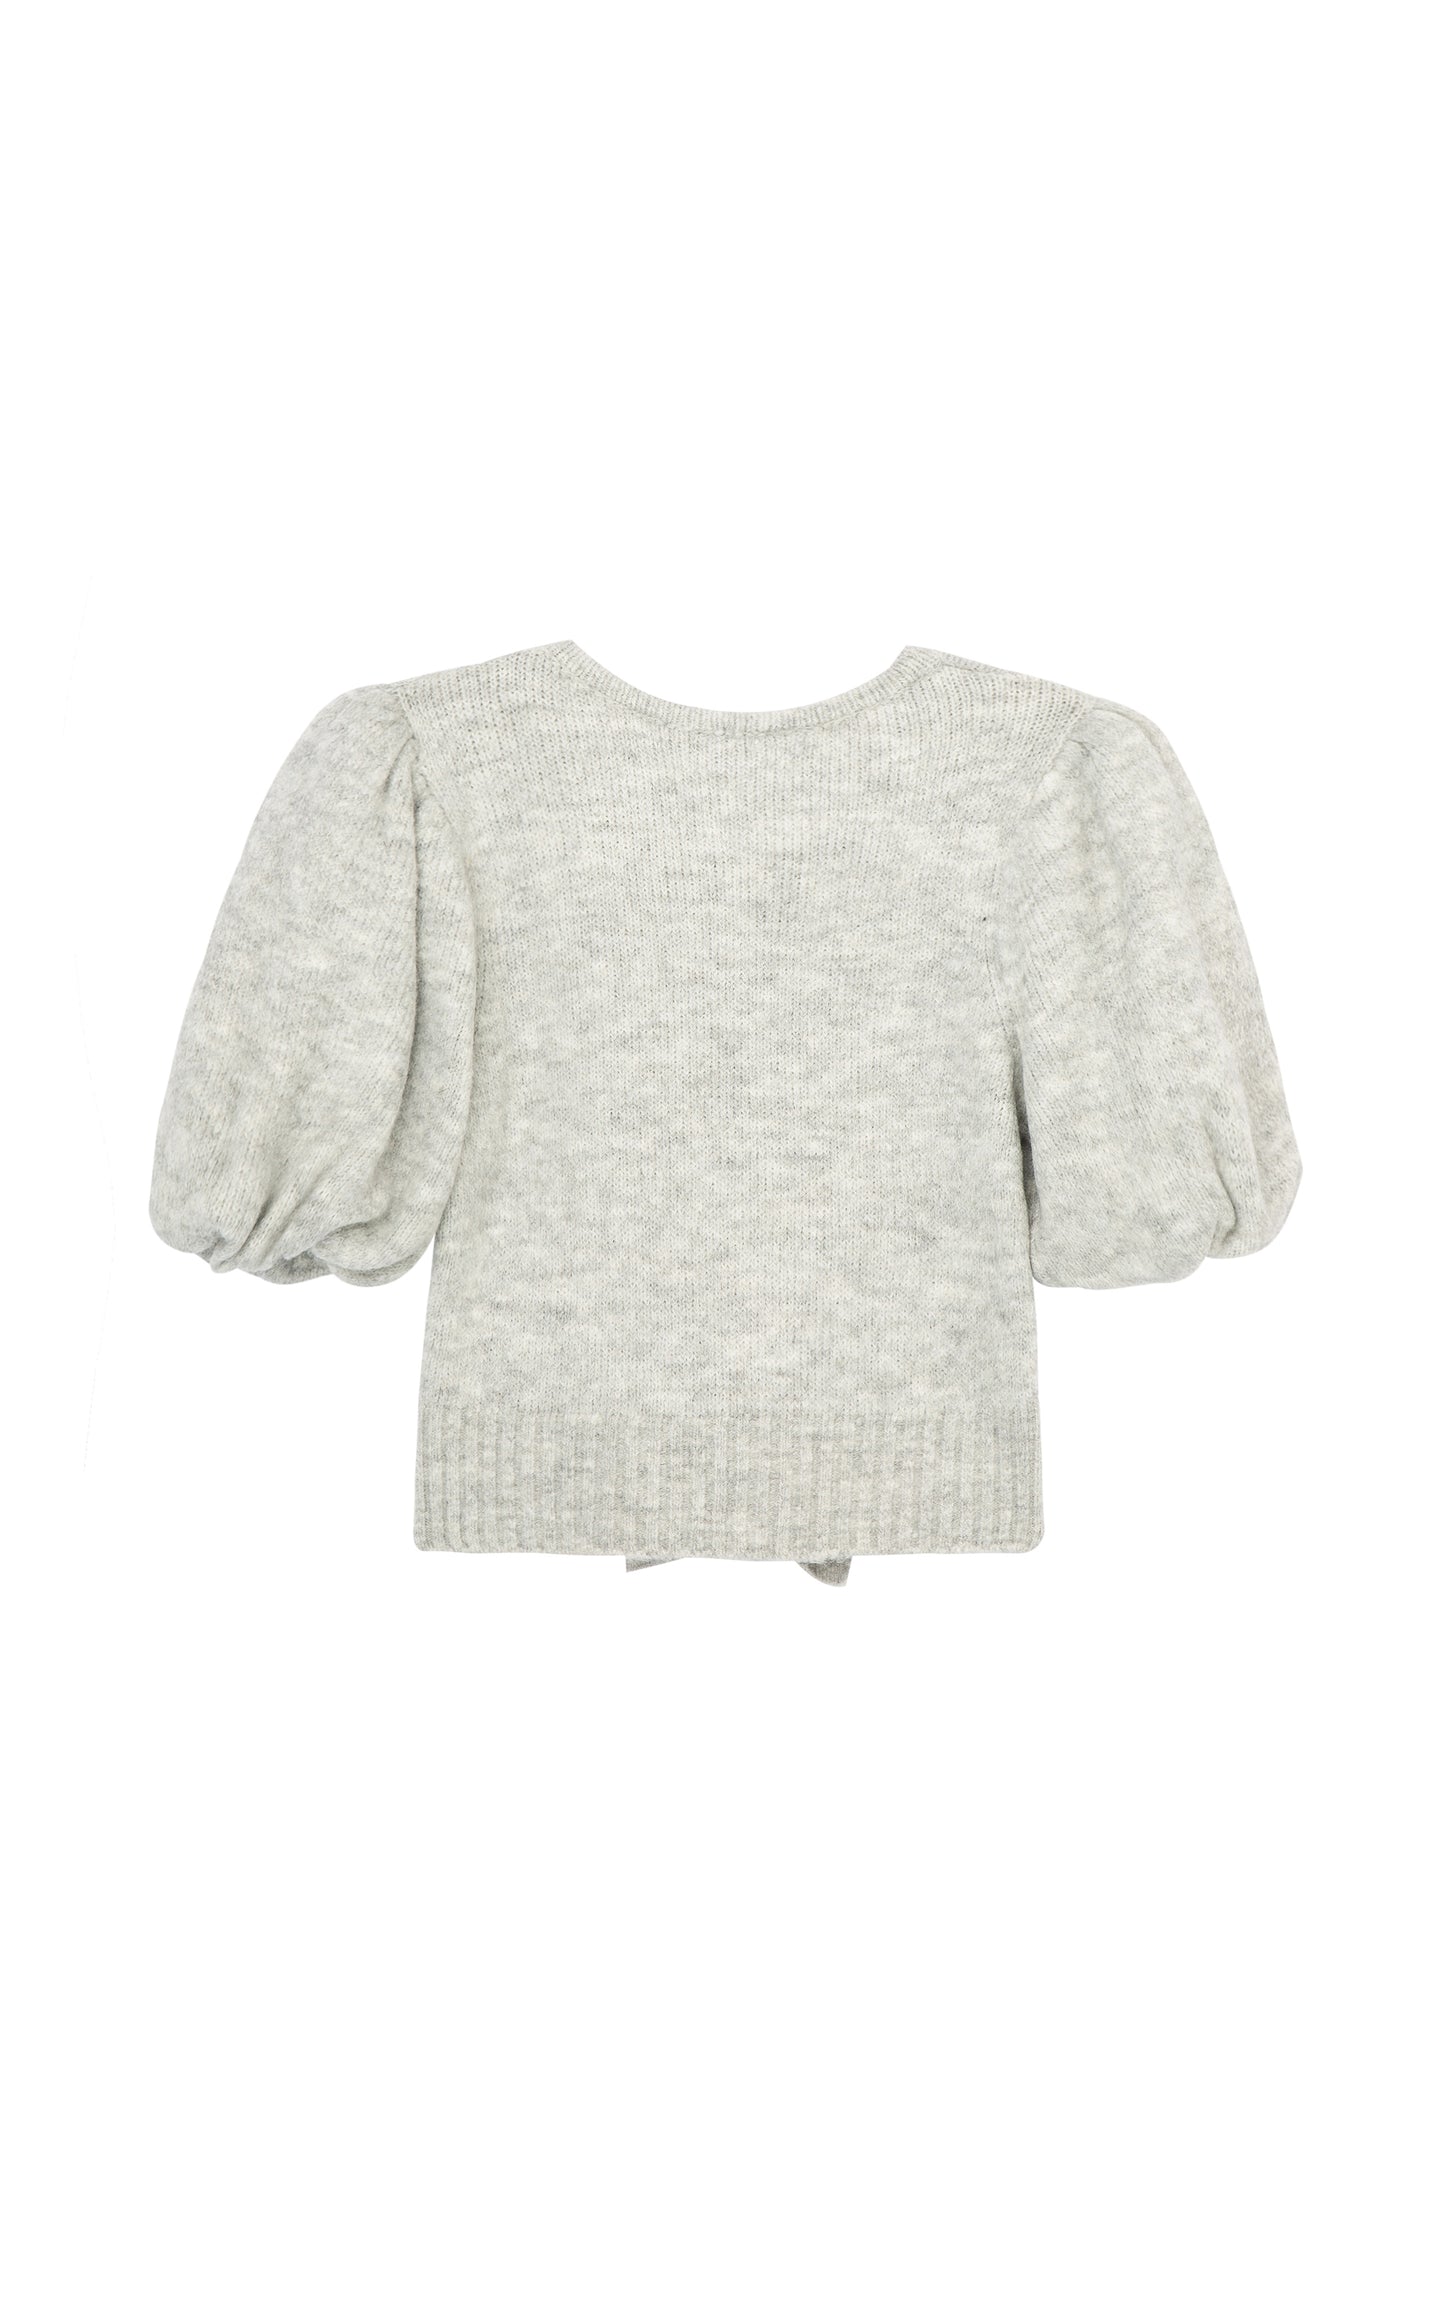 BACK OF LIGHT GREY PUFF SLEEVE SWEATER WITH TIE FRONT